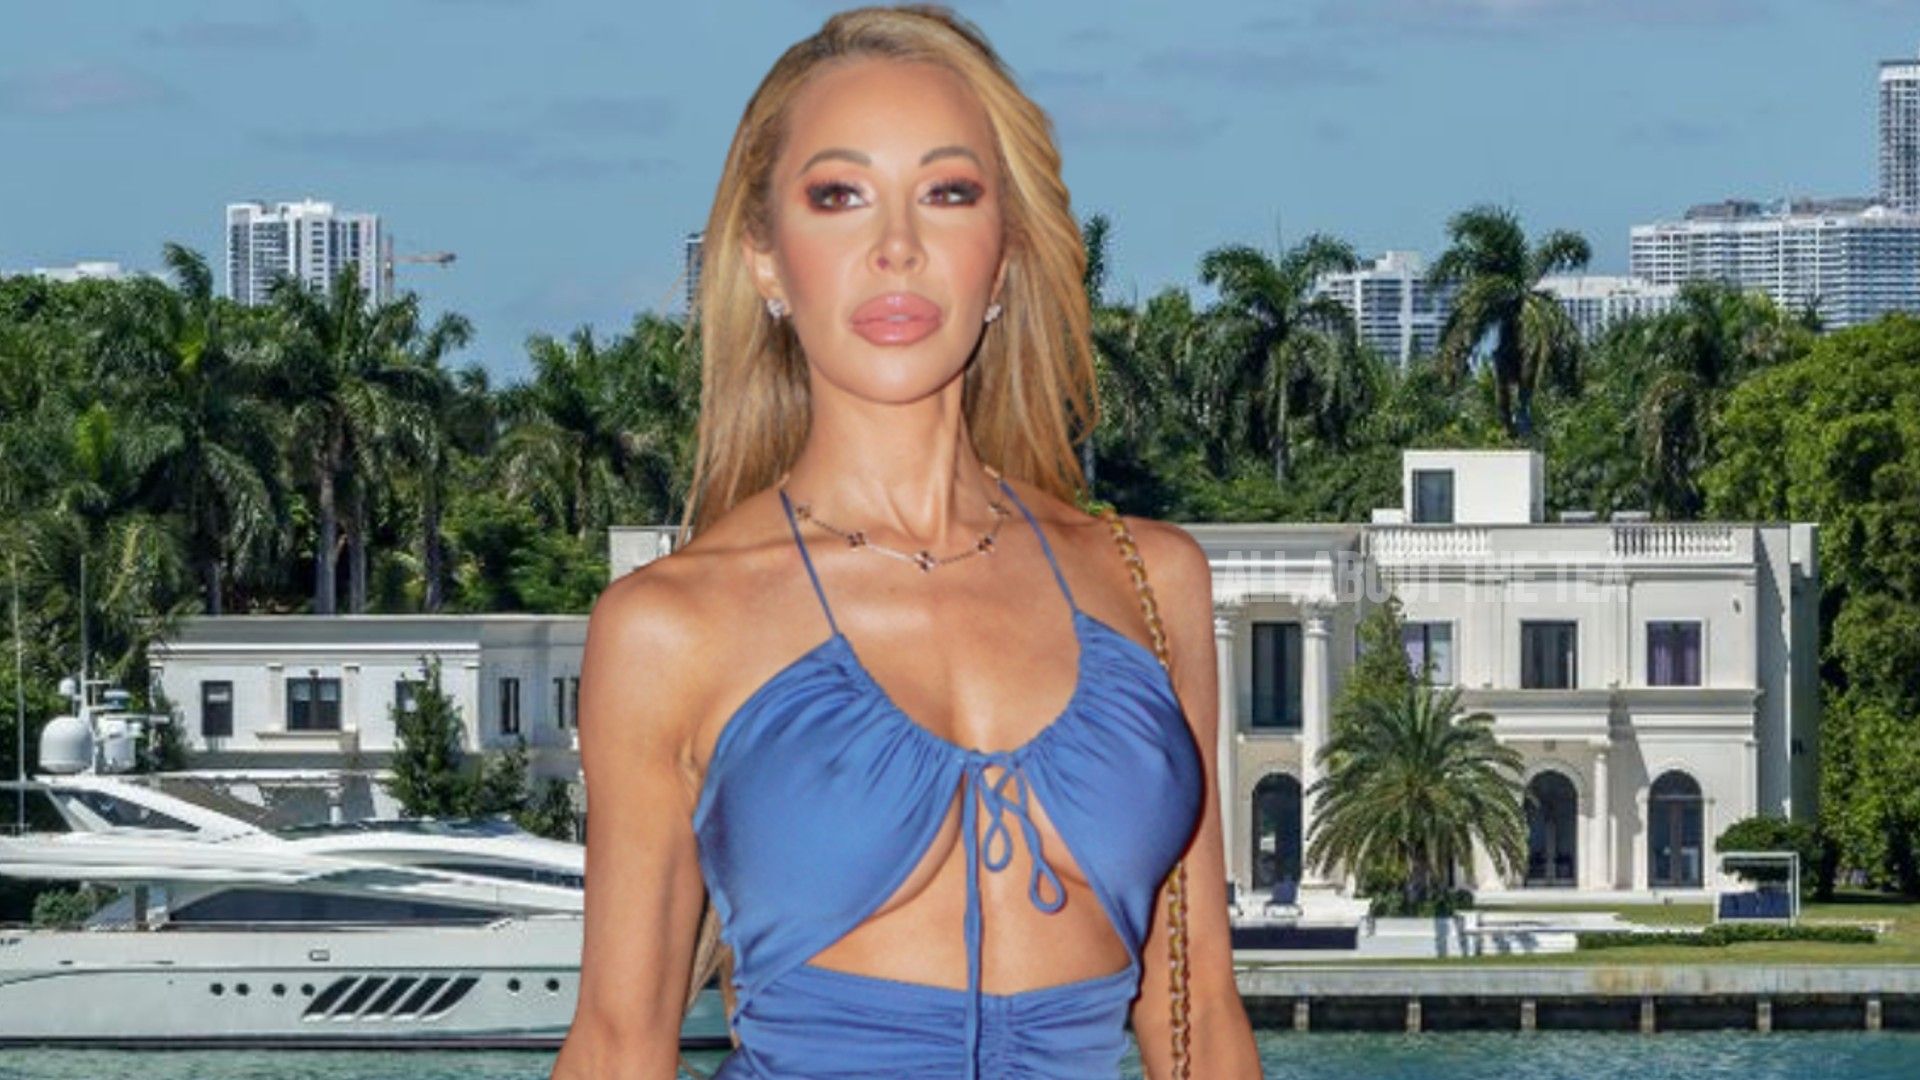 RHOM’s Lisa Hochstein Accused of Vicious Move: Ex Claims Star Cleaned Out $10M Home, Even Took Pots and Pans for the Kids’ Meals